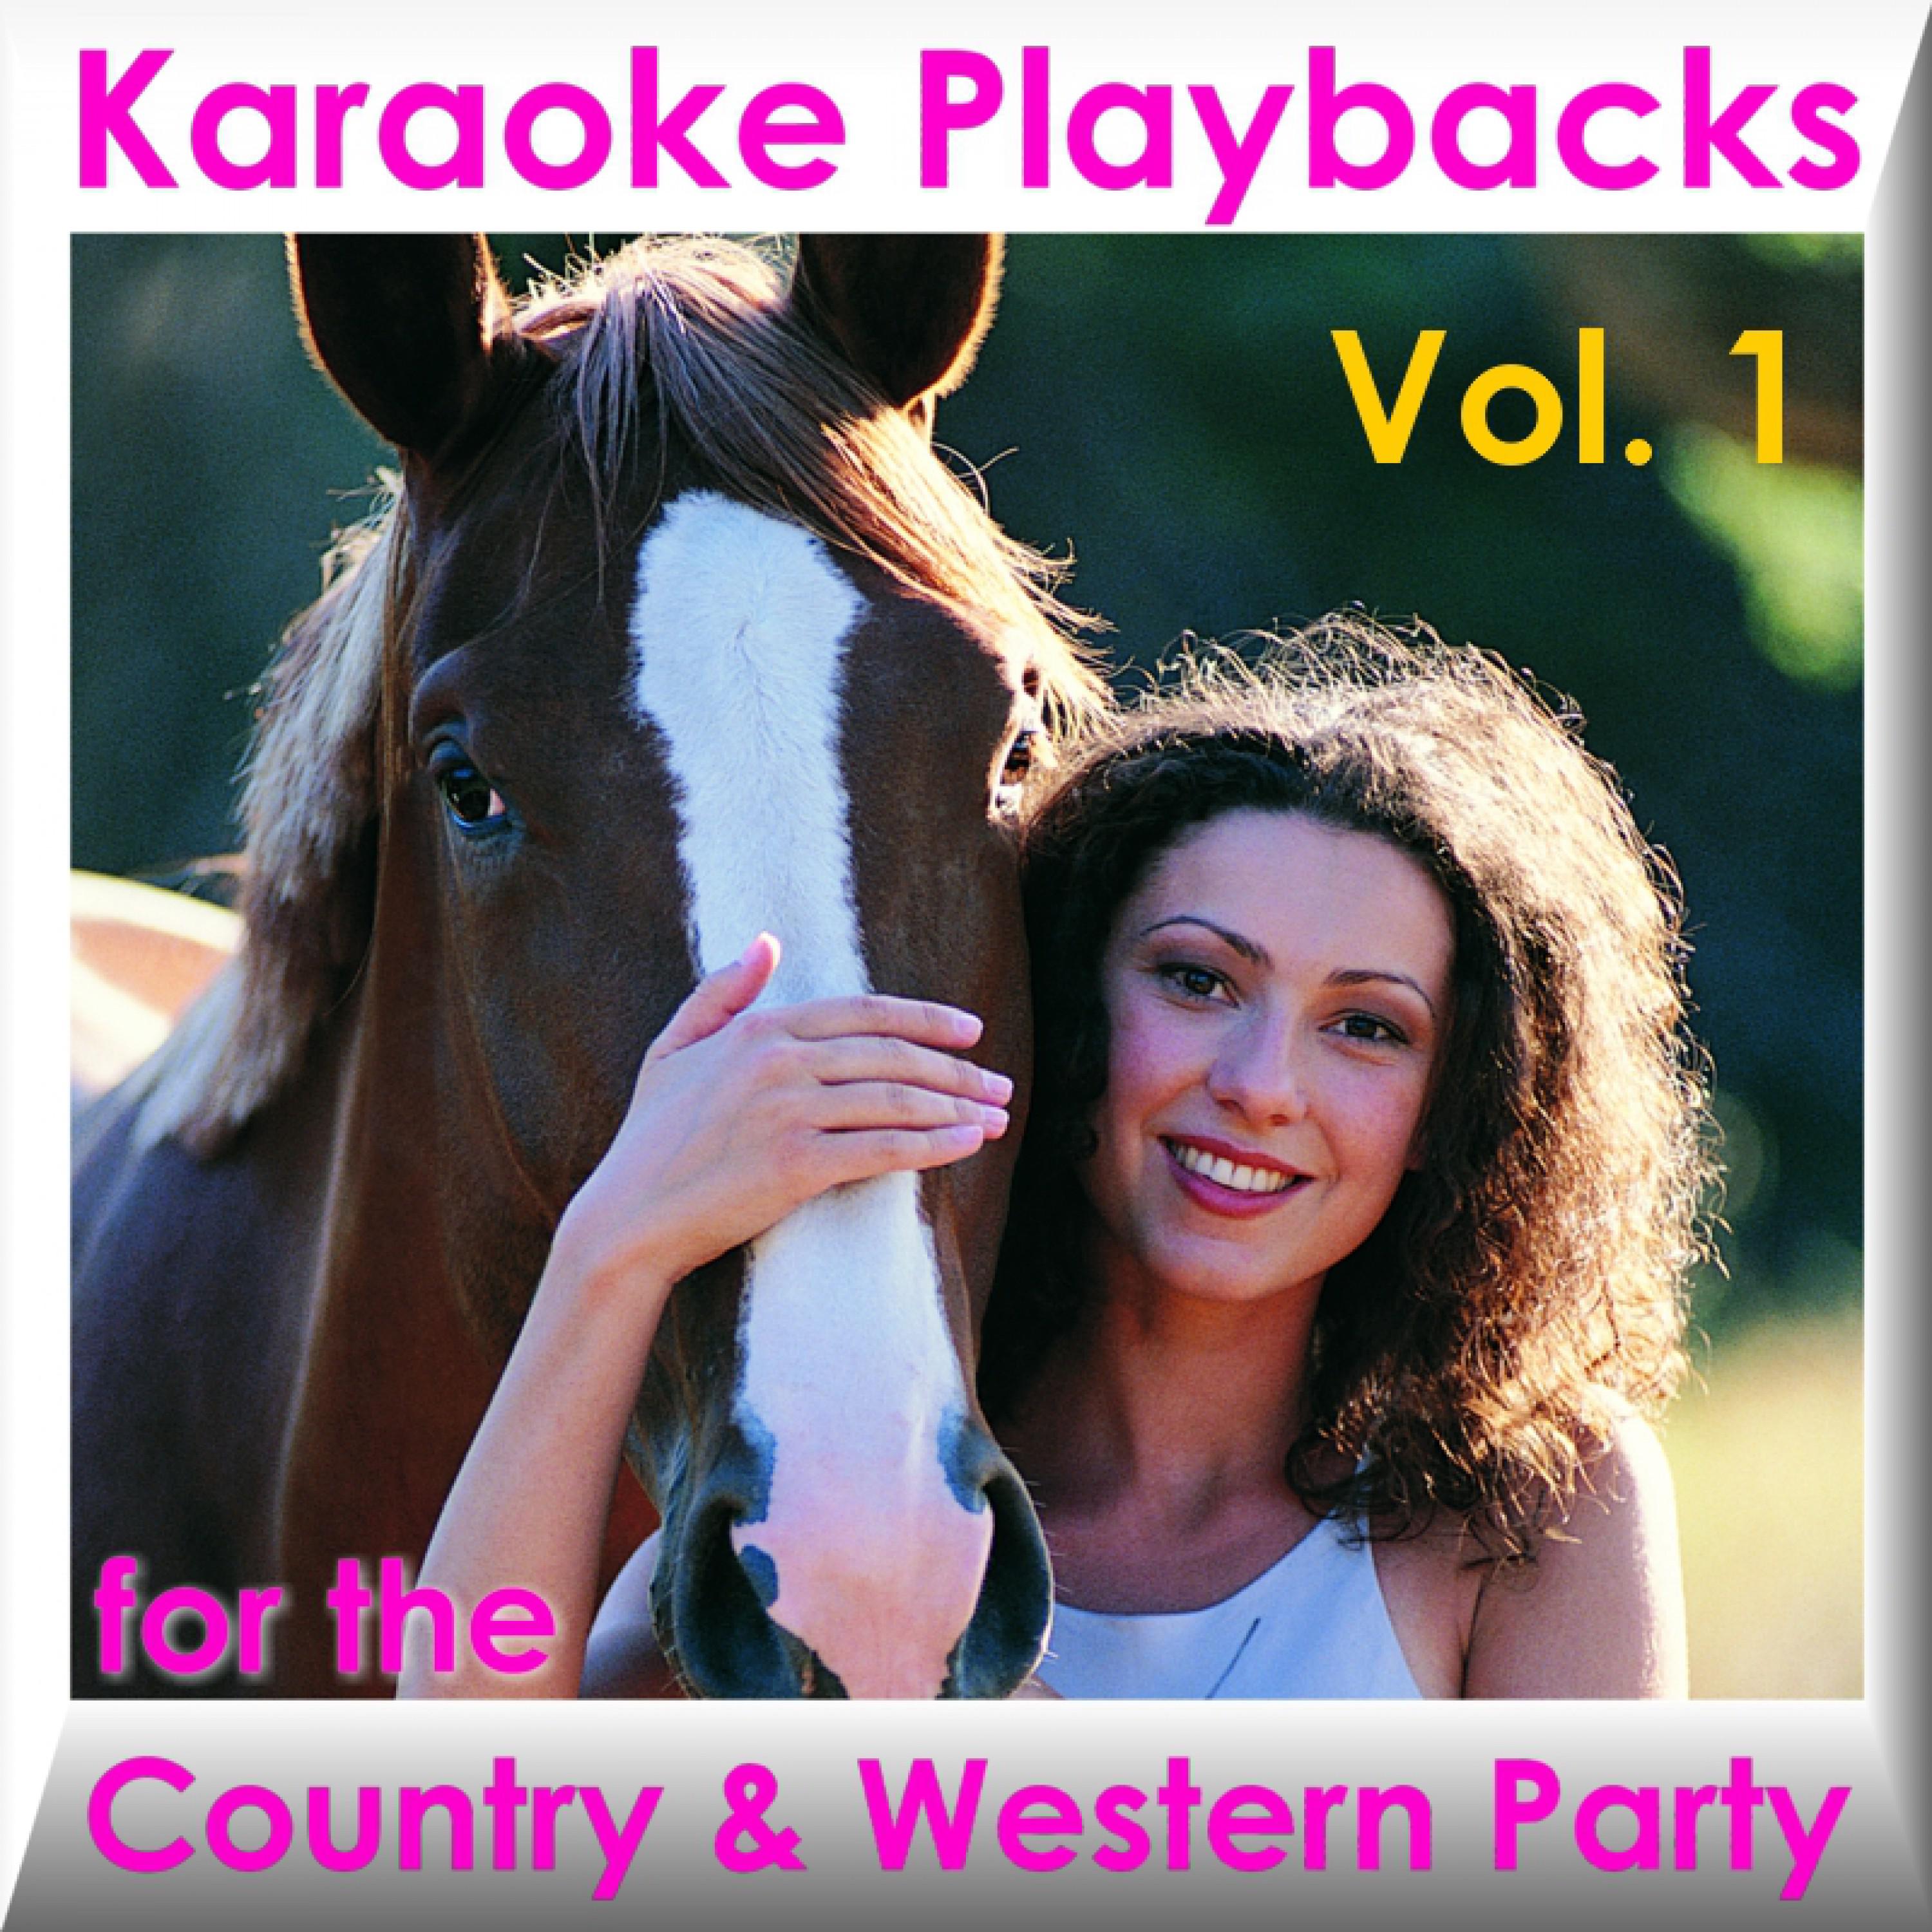 Karaoke Playbacks for the Country & Western Party Vol. 1